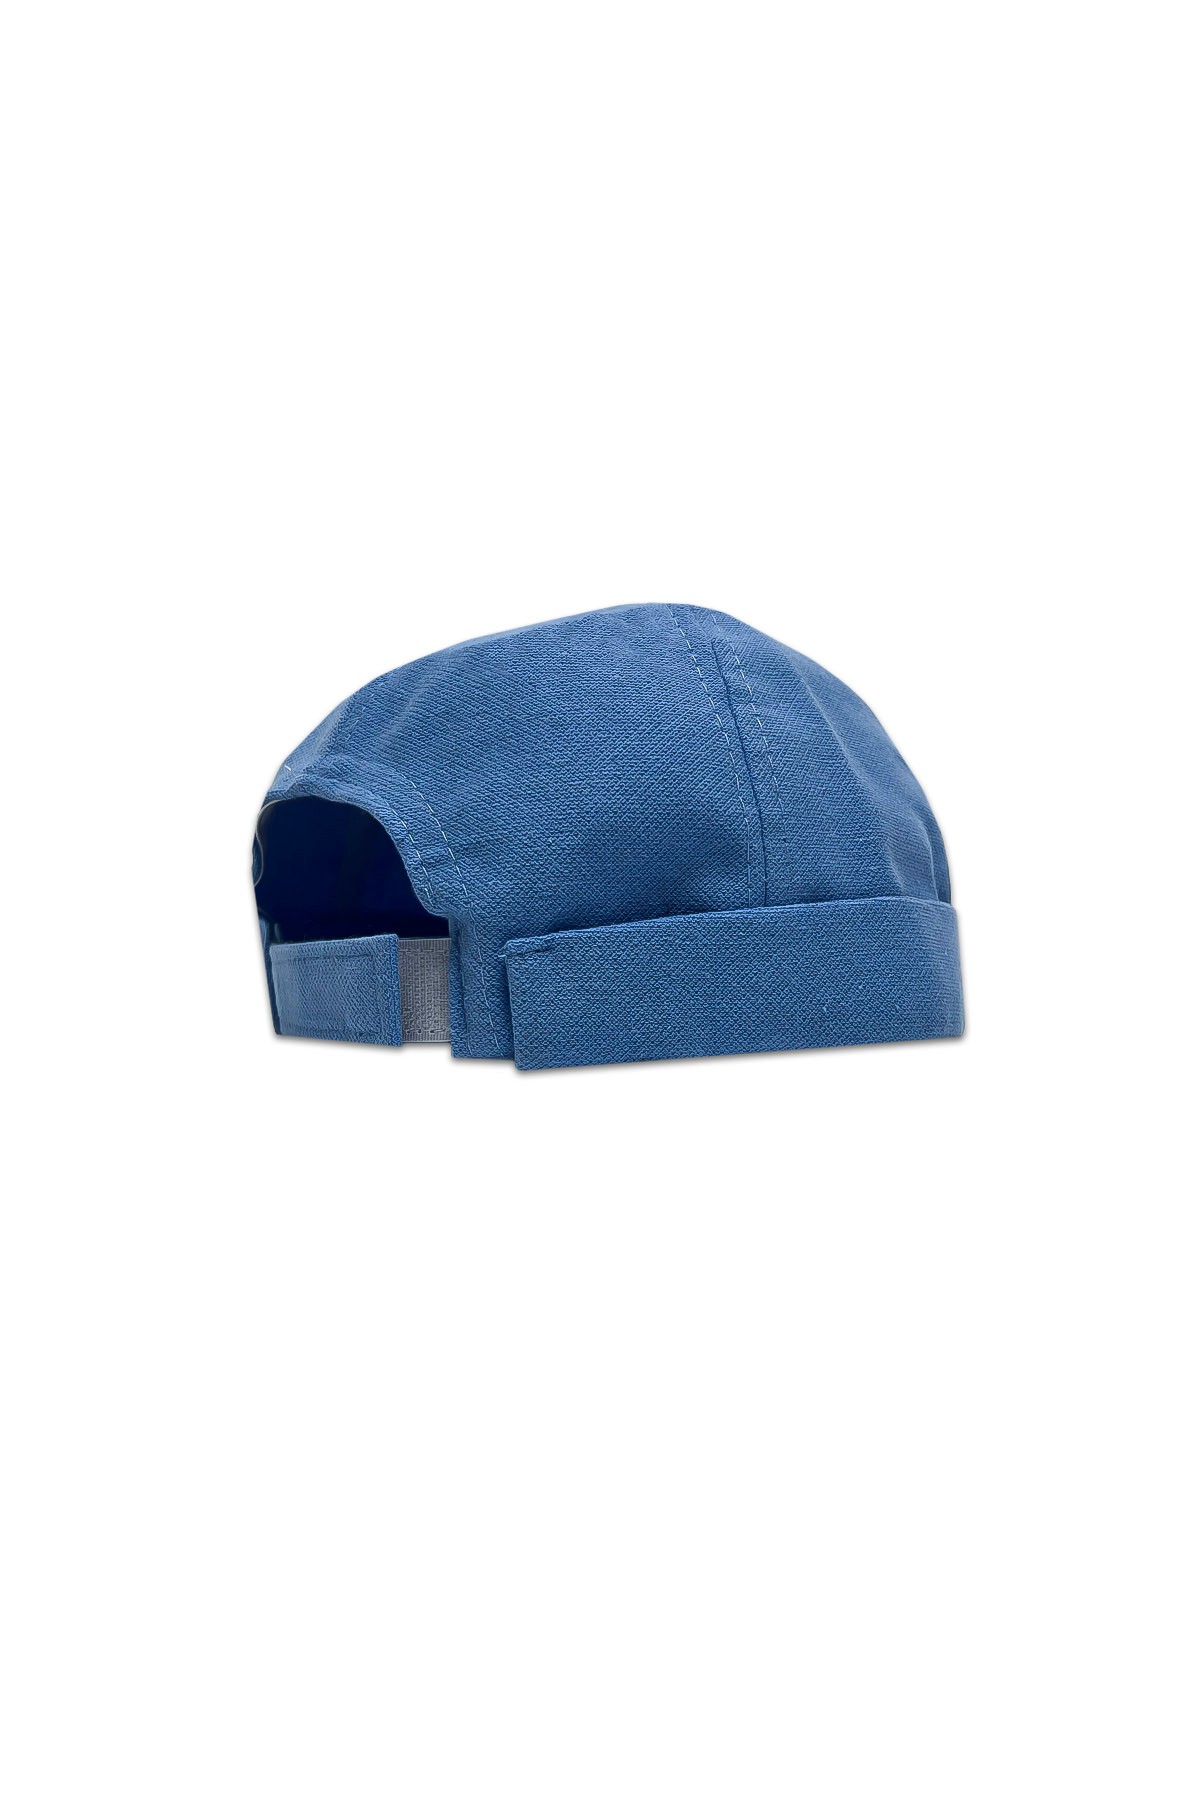 Nuo - Brimless Cap - BABY BLUE